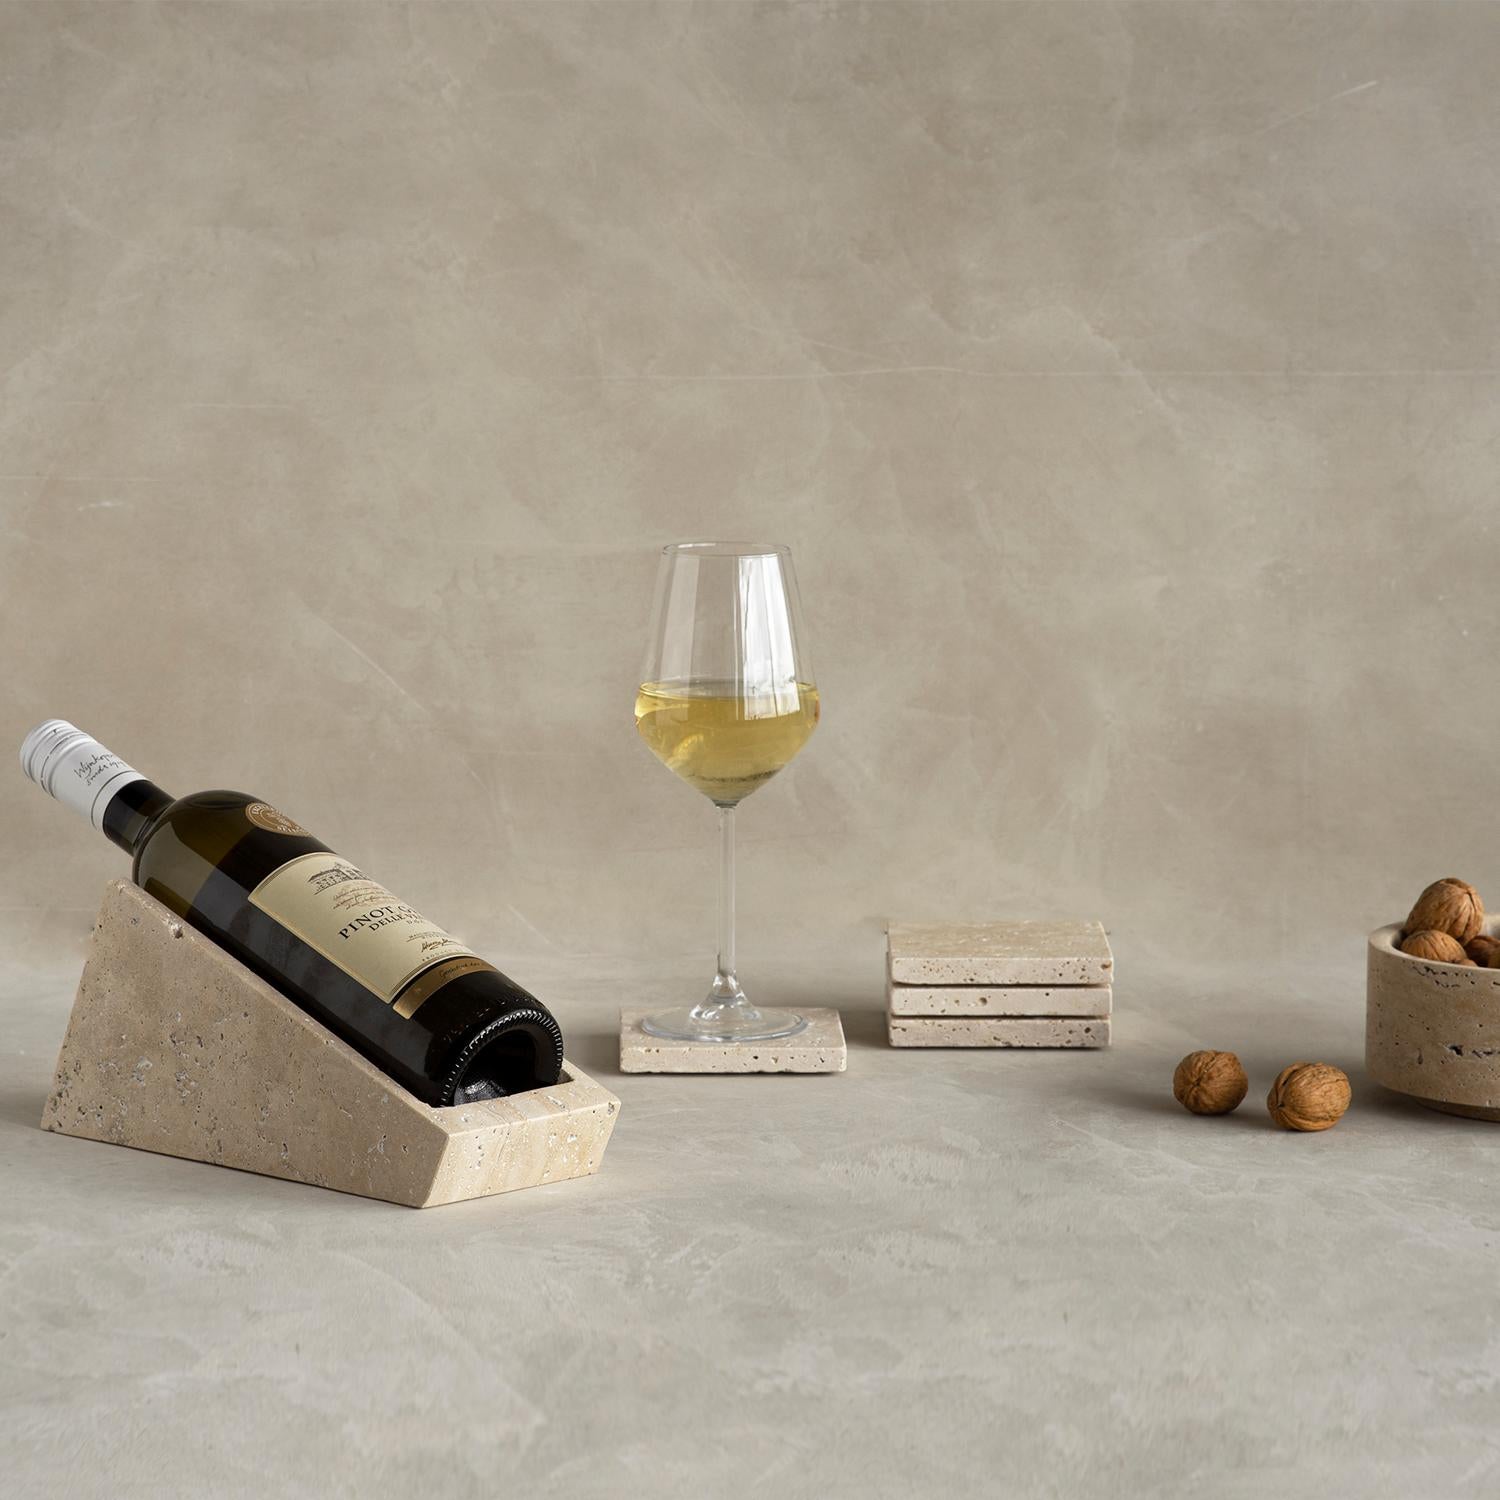 Put your wine on a style. Crafted entirely from travertine, this wine holder is a beautiful way to put your favorite wine bottle on a kitchen counter or table, and is striking enough to work as a centerpiece for your tablescape. 

Overall